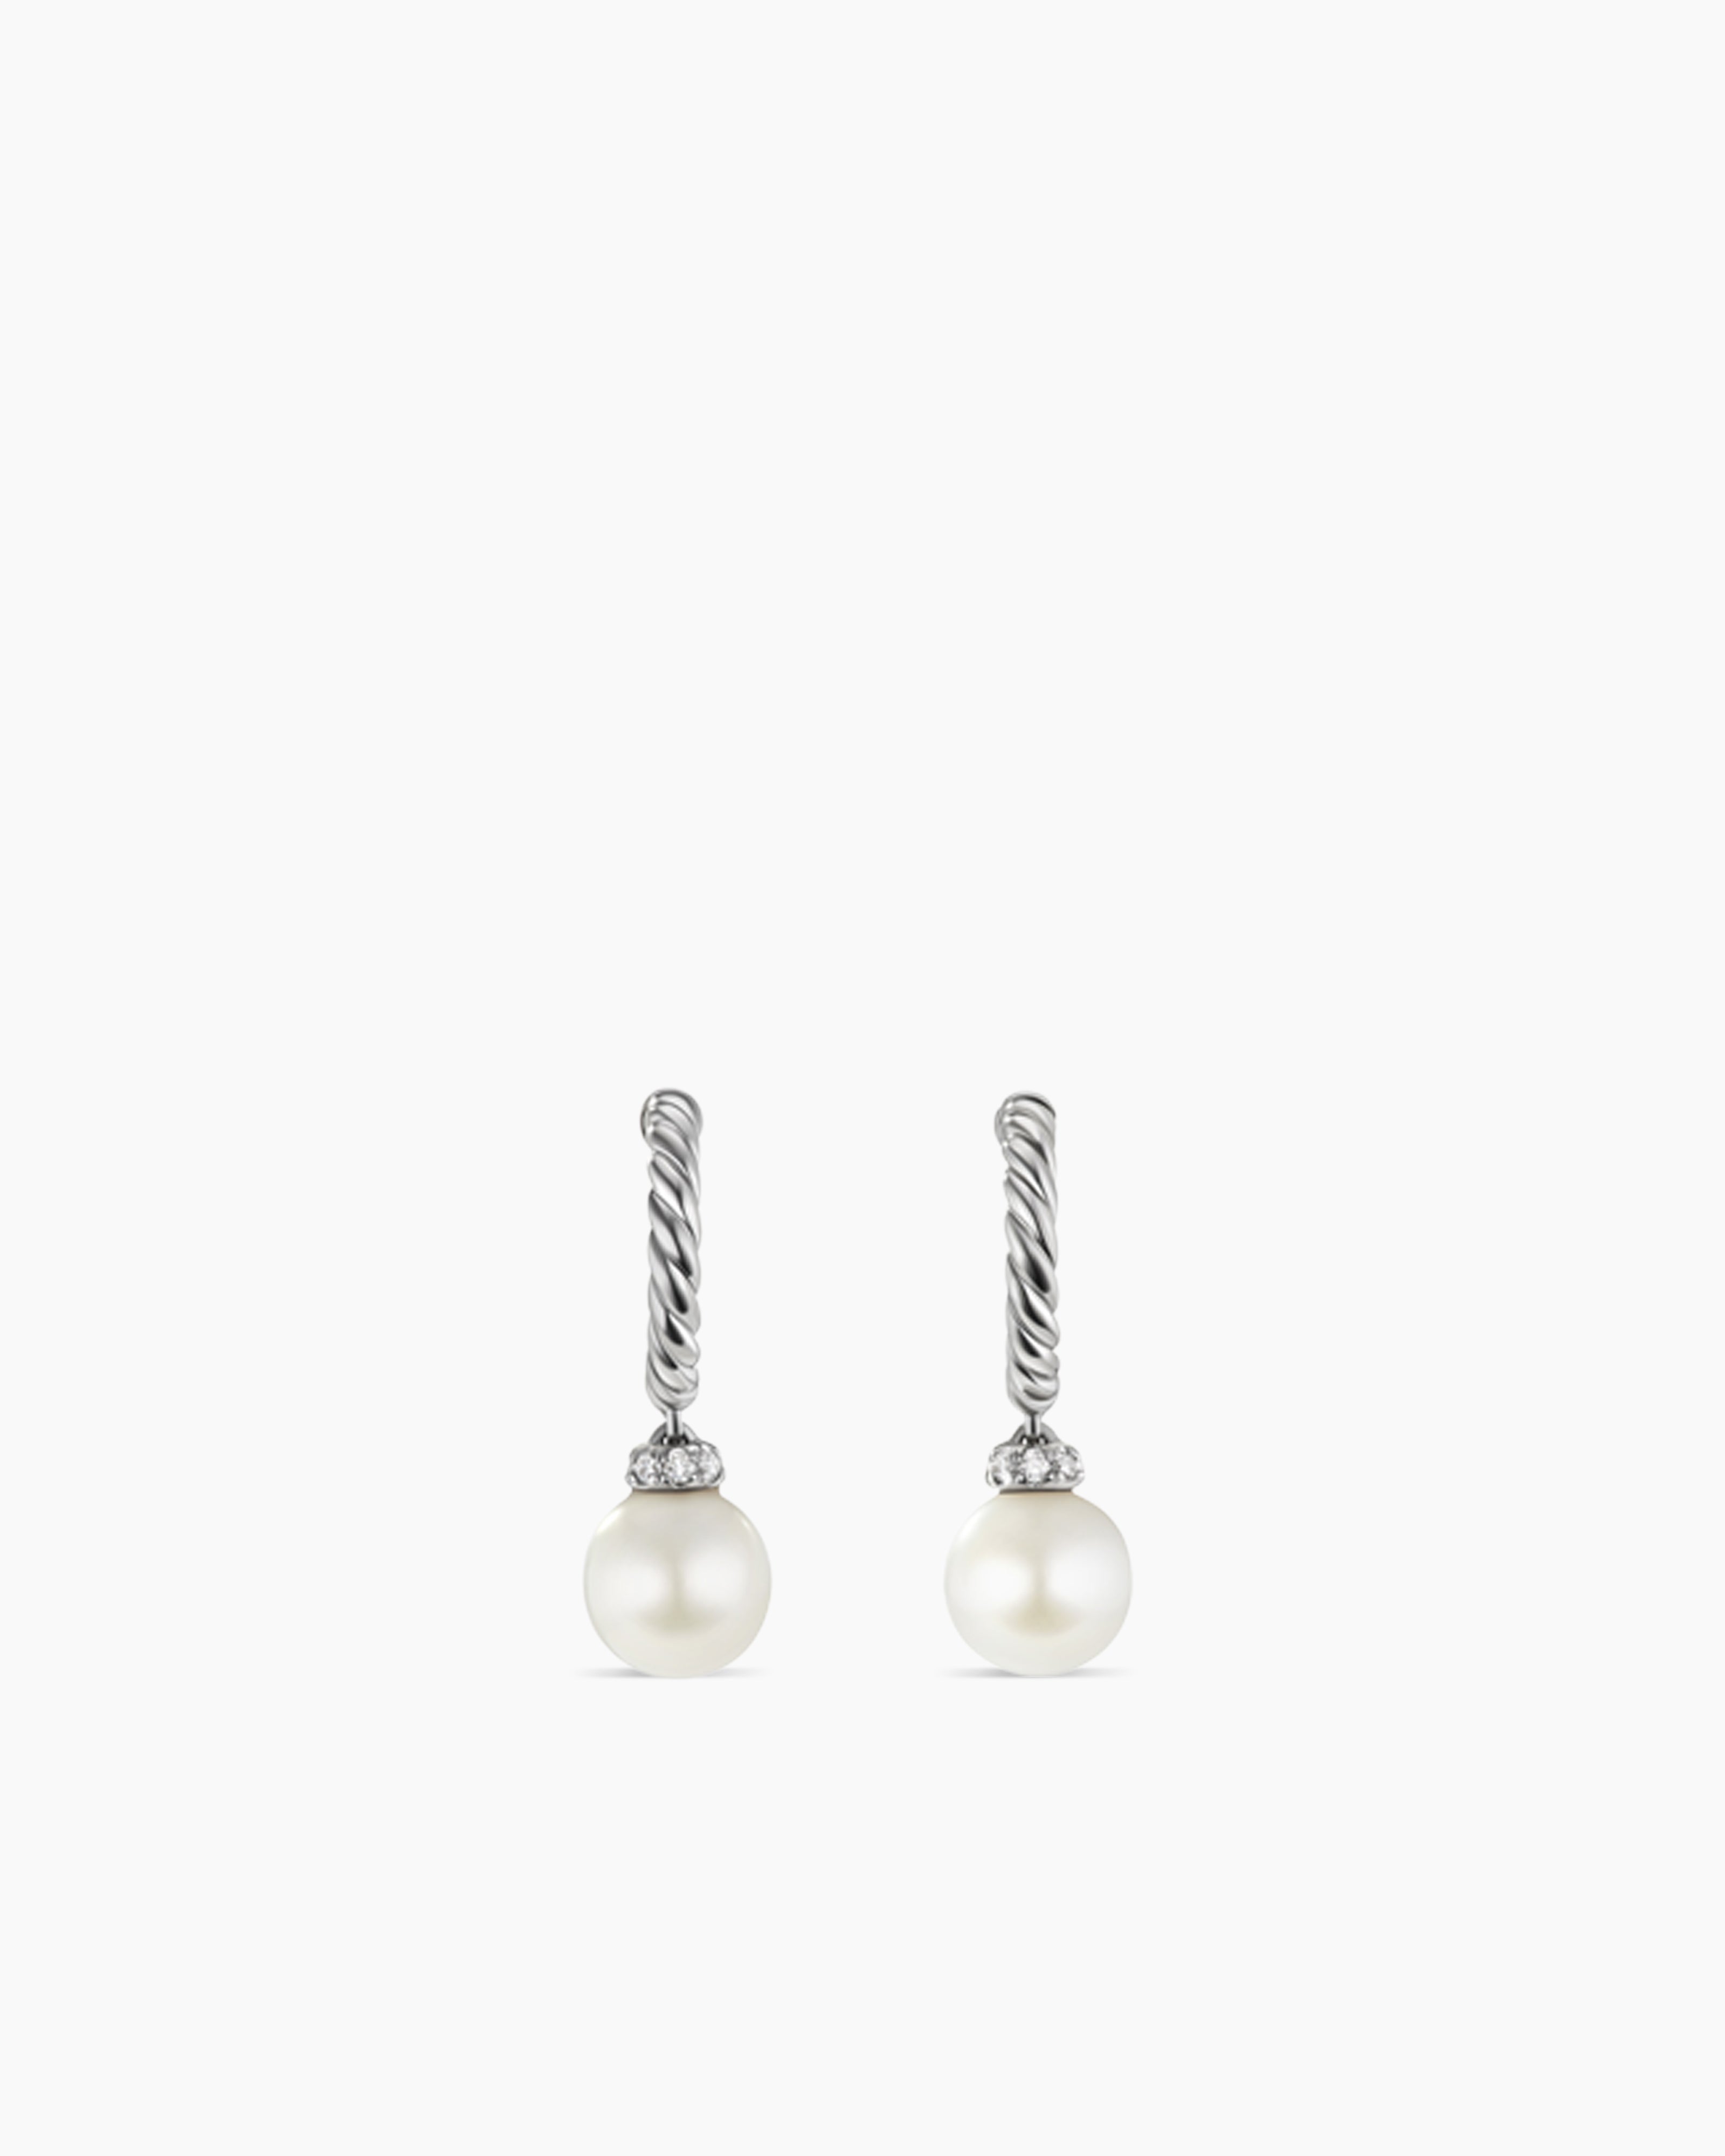 Pearl and Pavé Solari Drop Earrings in Sterling Silver with Pearls and  Diamonds, 18.4mm